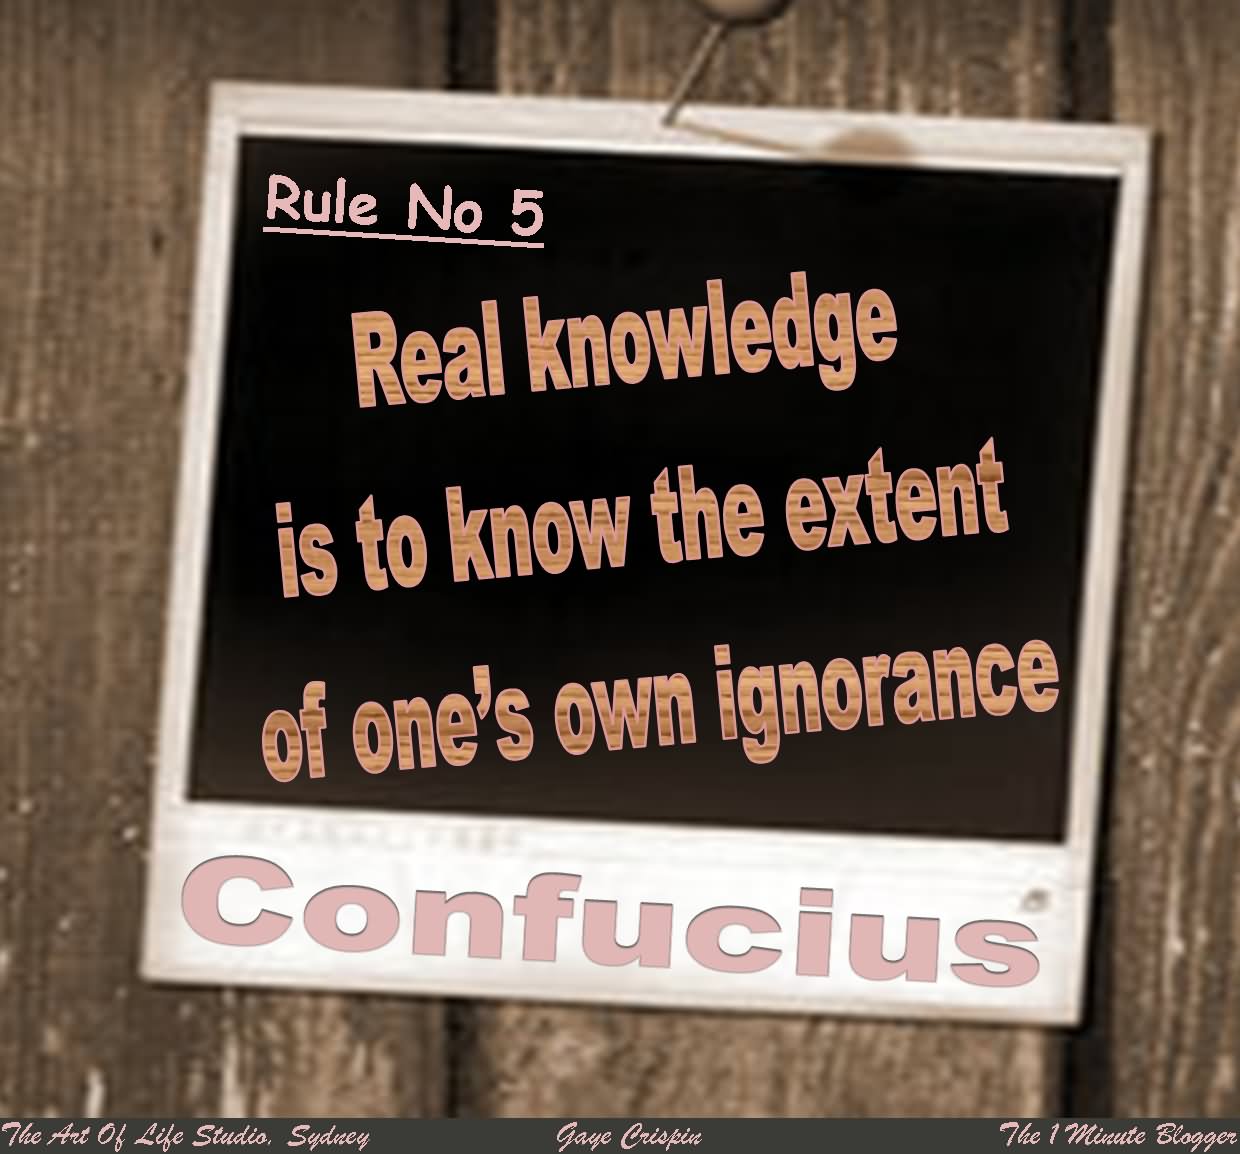 Real knowledge is to know the extent of one's own ignorance.